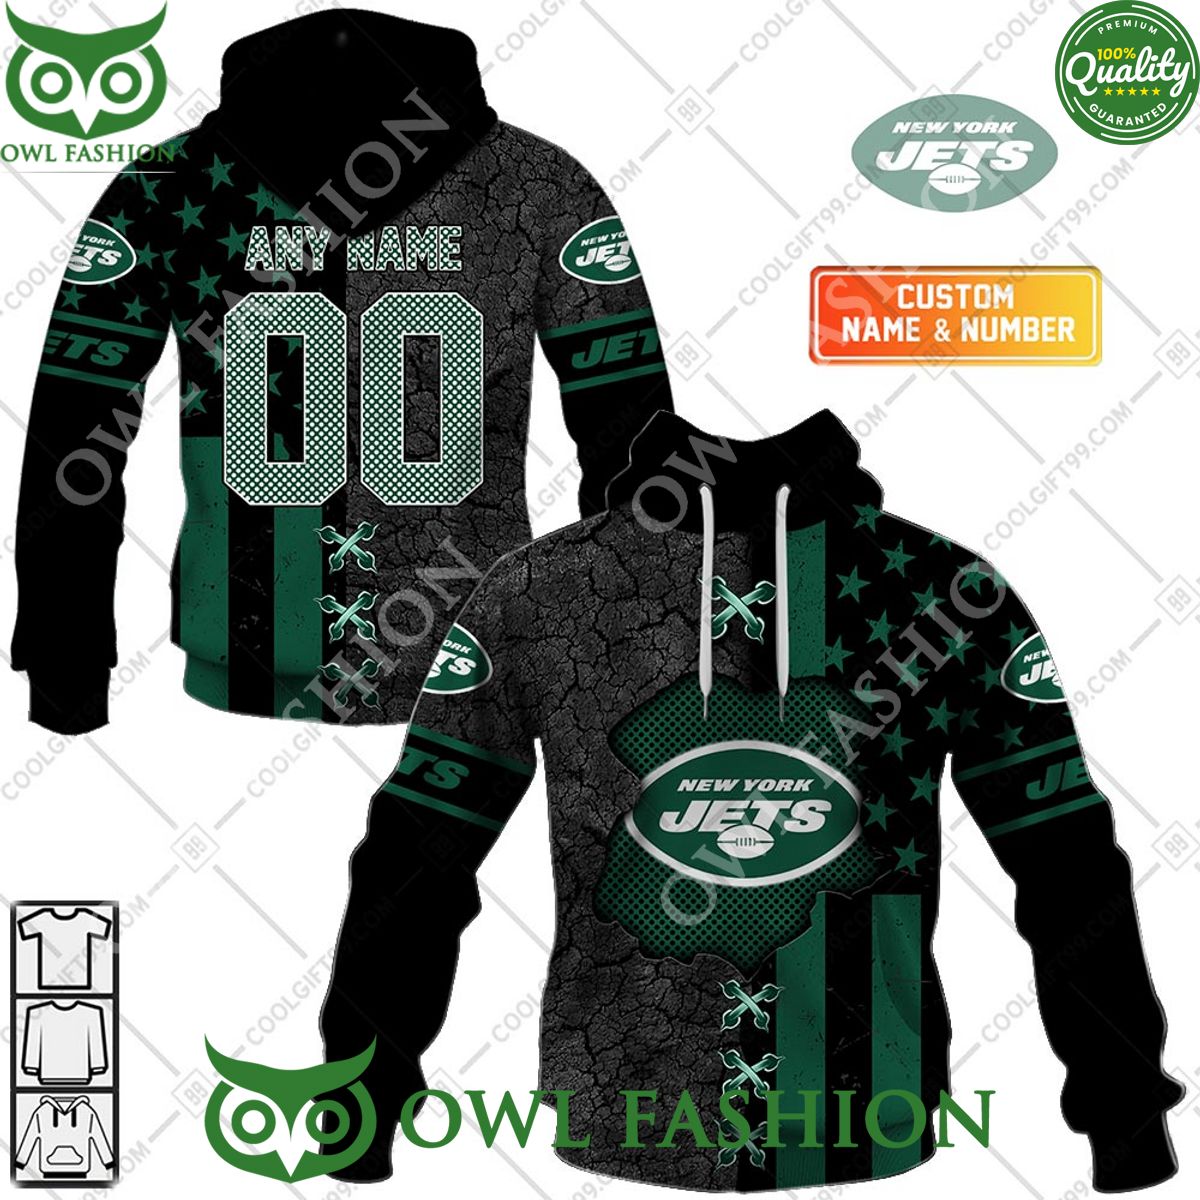 Personalized NFL New York Jets USA Flag Broken Mix Hoodie shirt